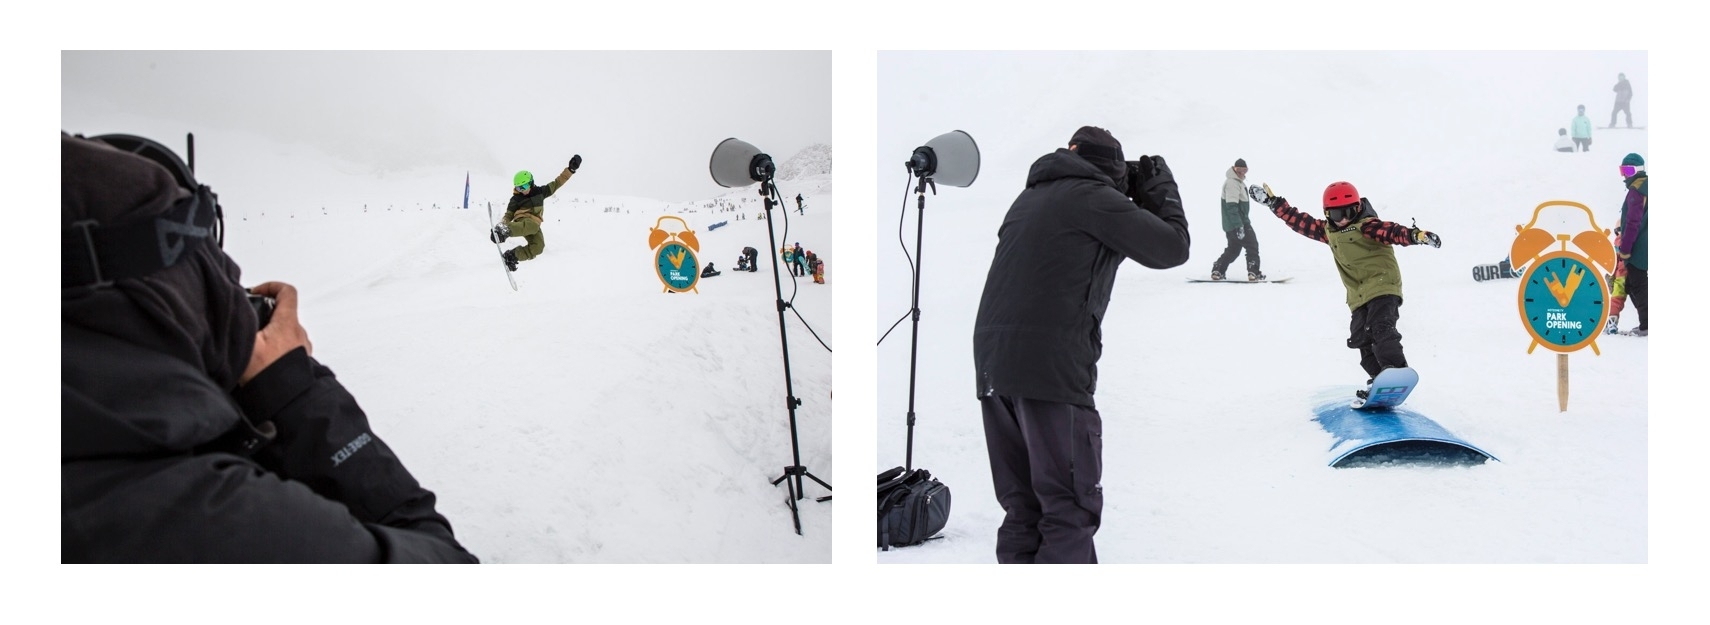 13. Kids shoot session. The future is looking bright! Photos by Andreas Monsberger.jpg